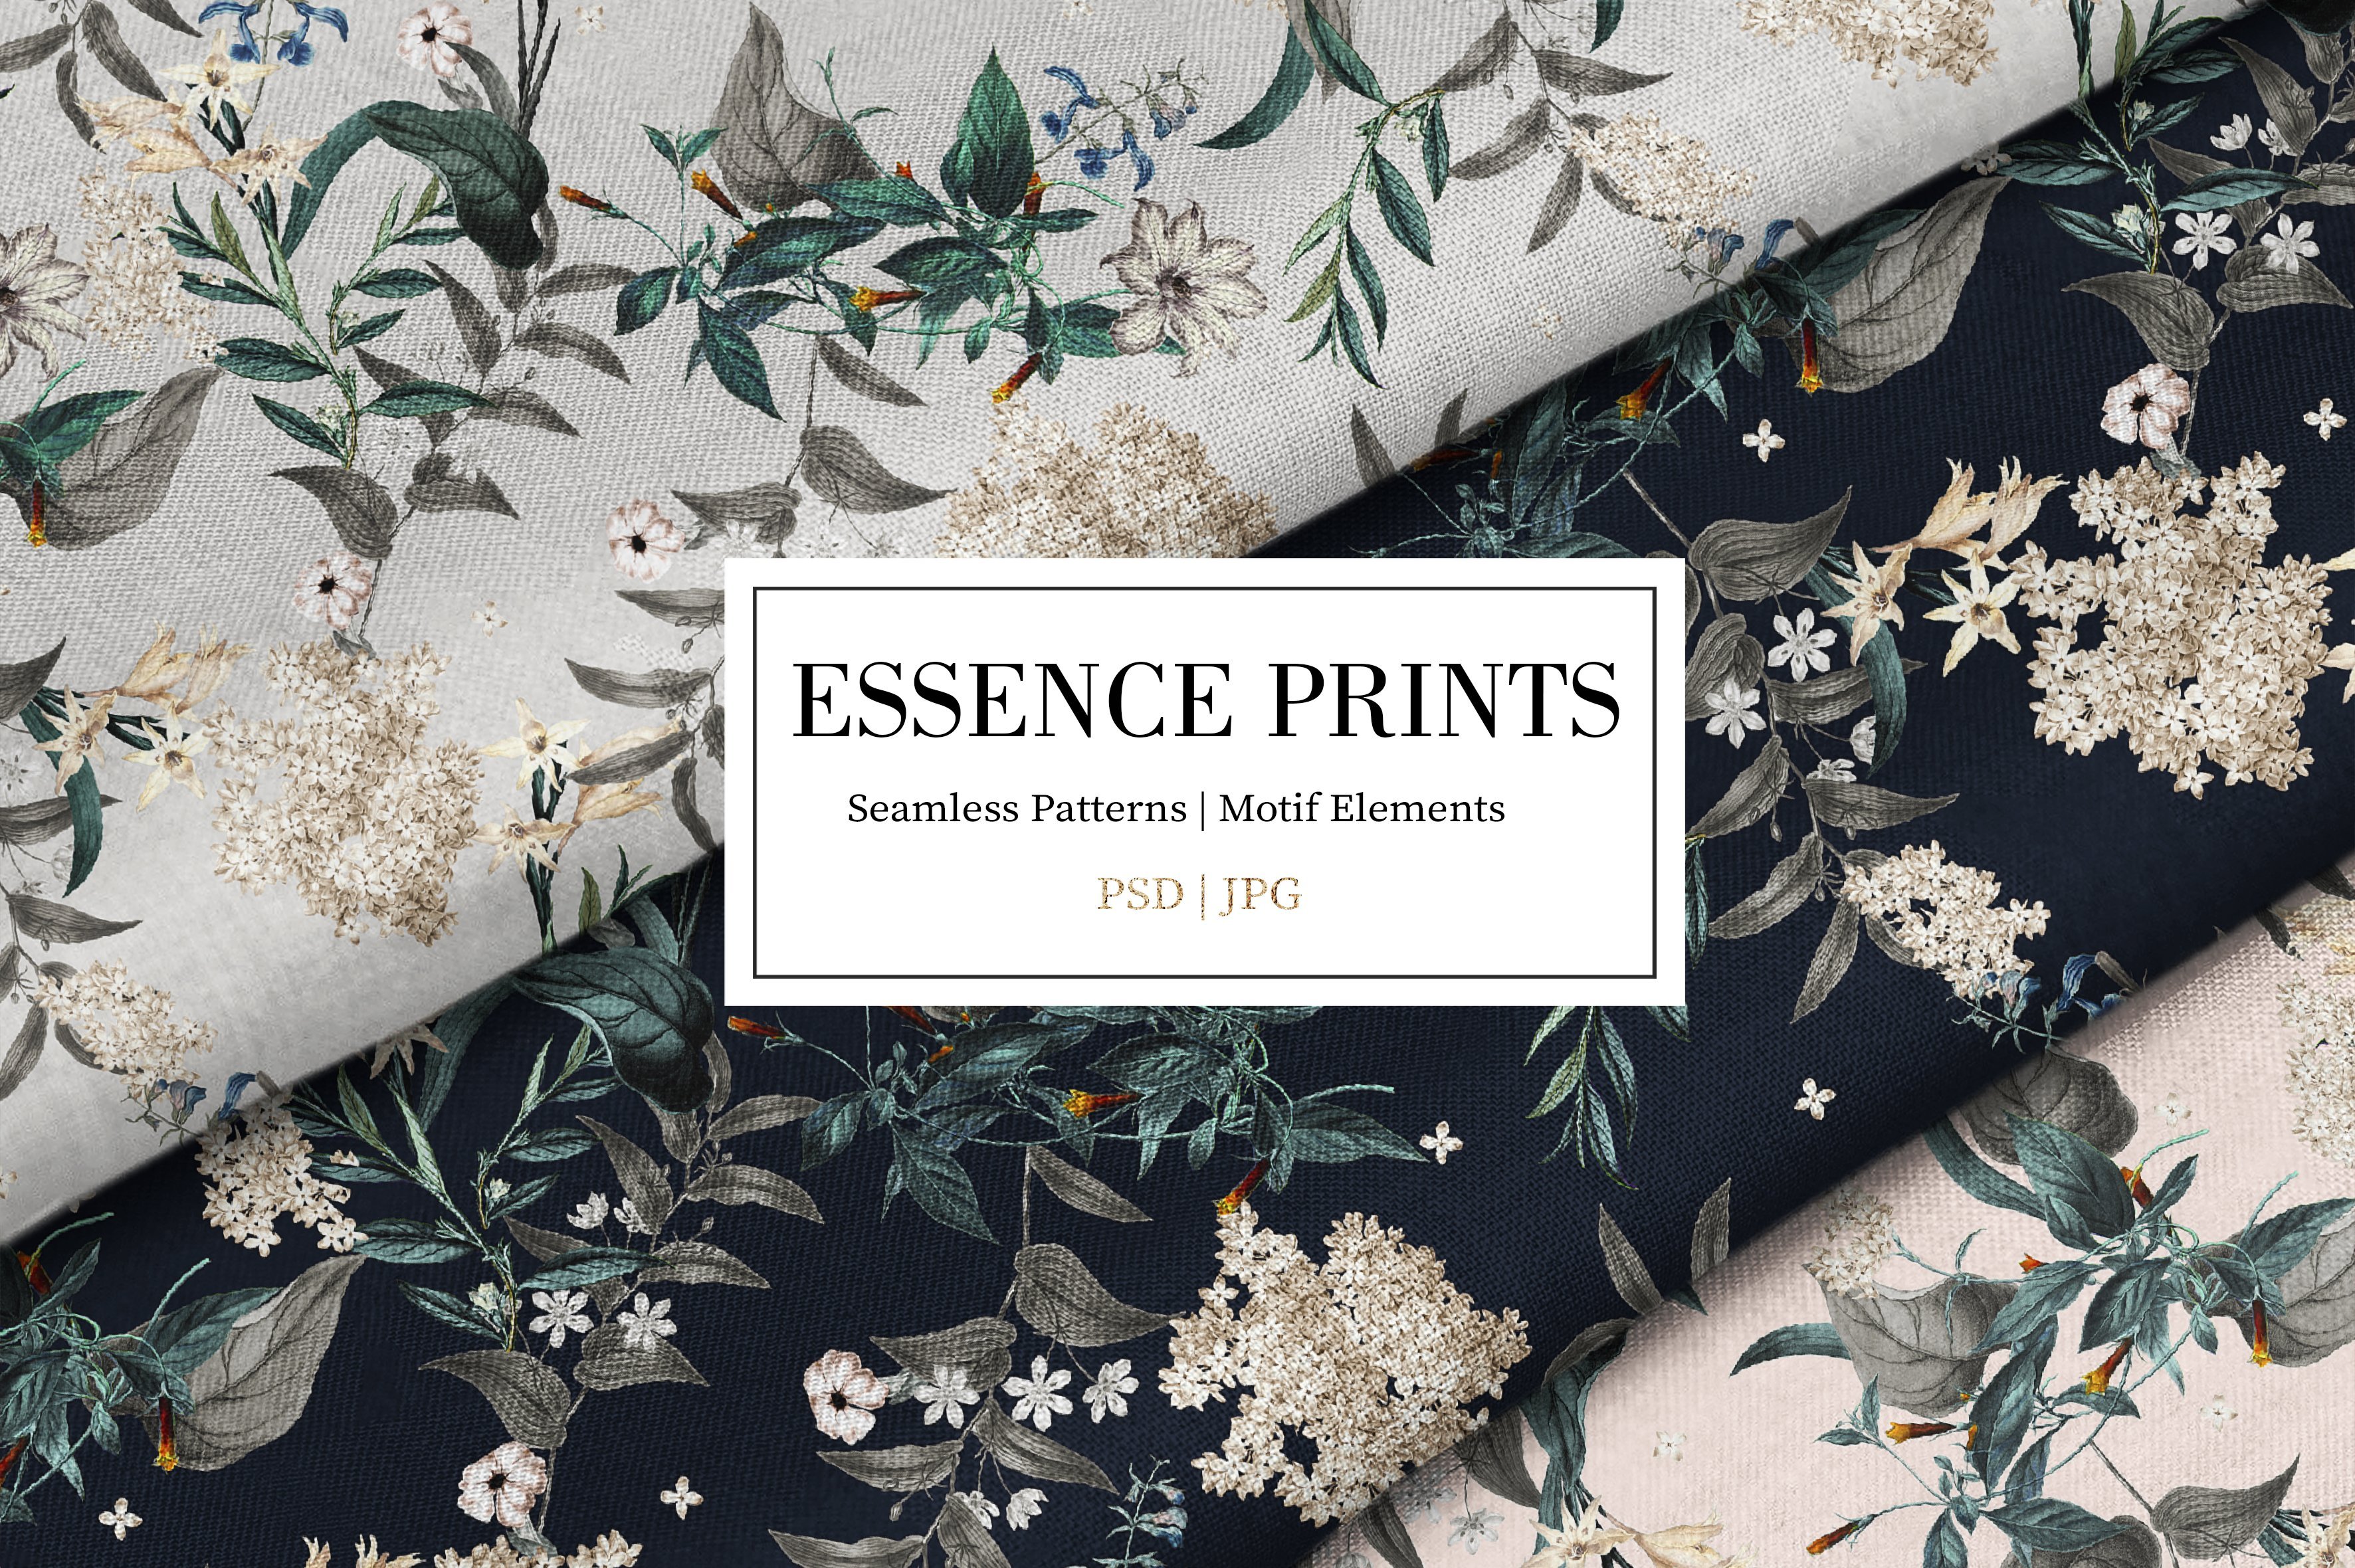 Essence Prints Design with Exquisite Patterns